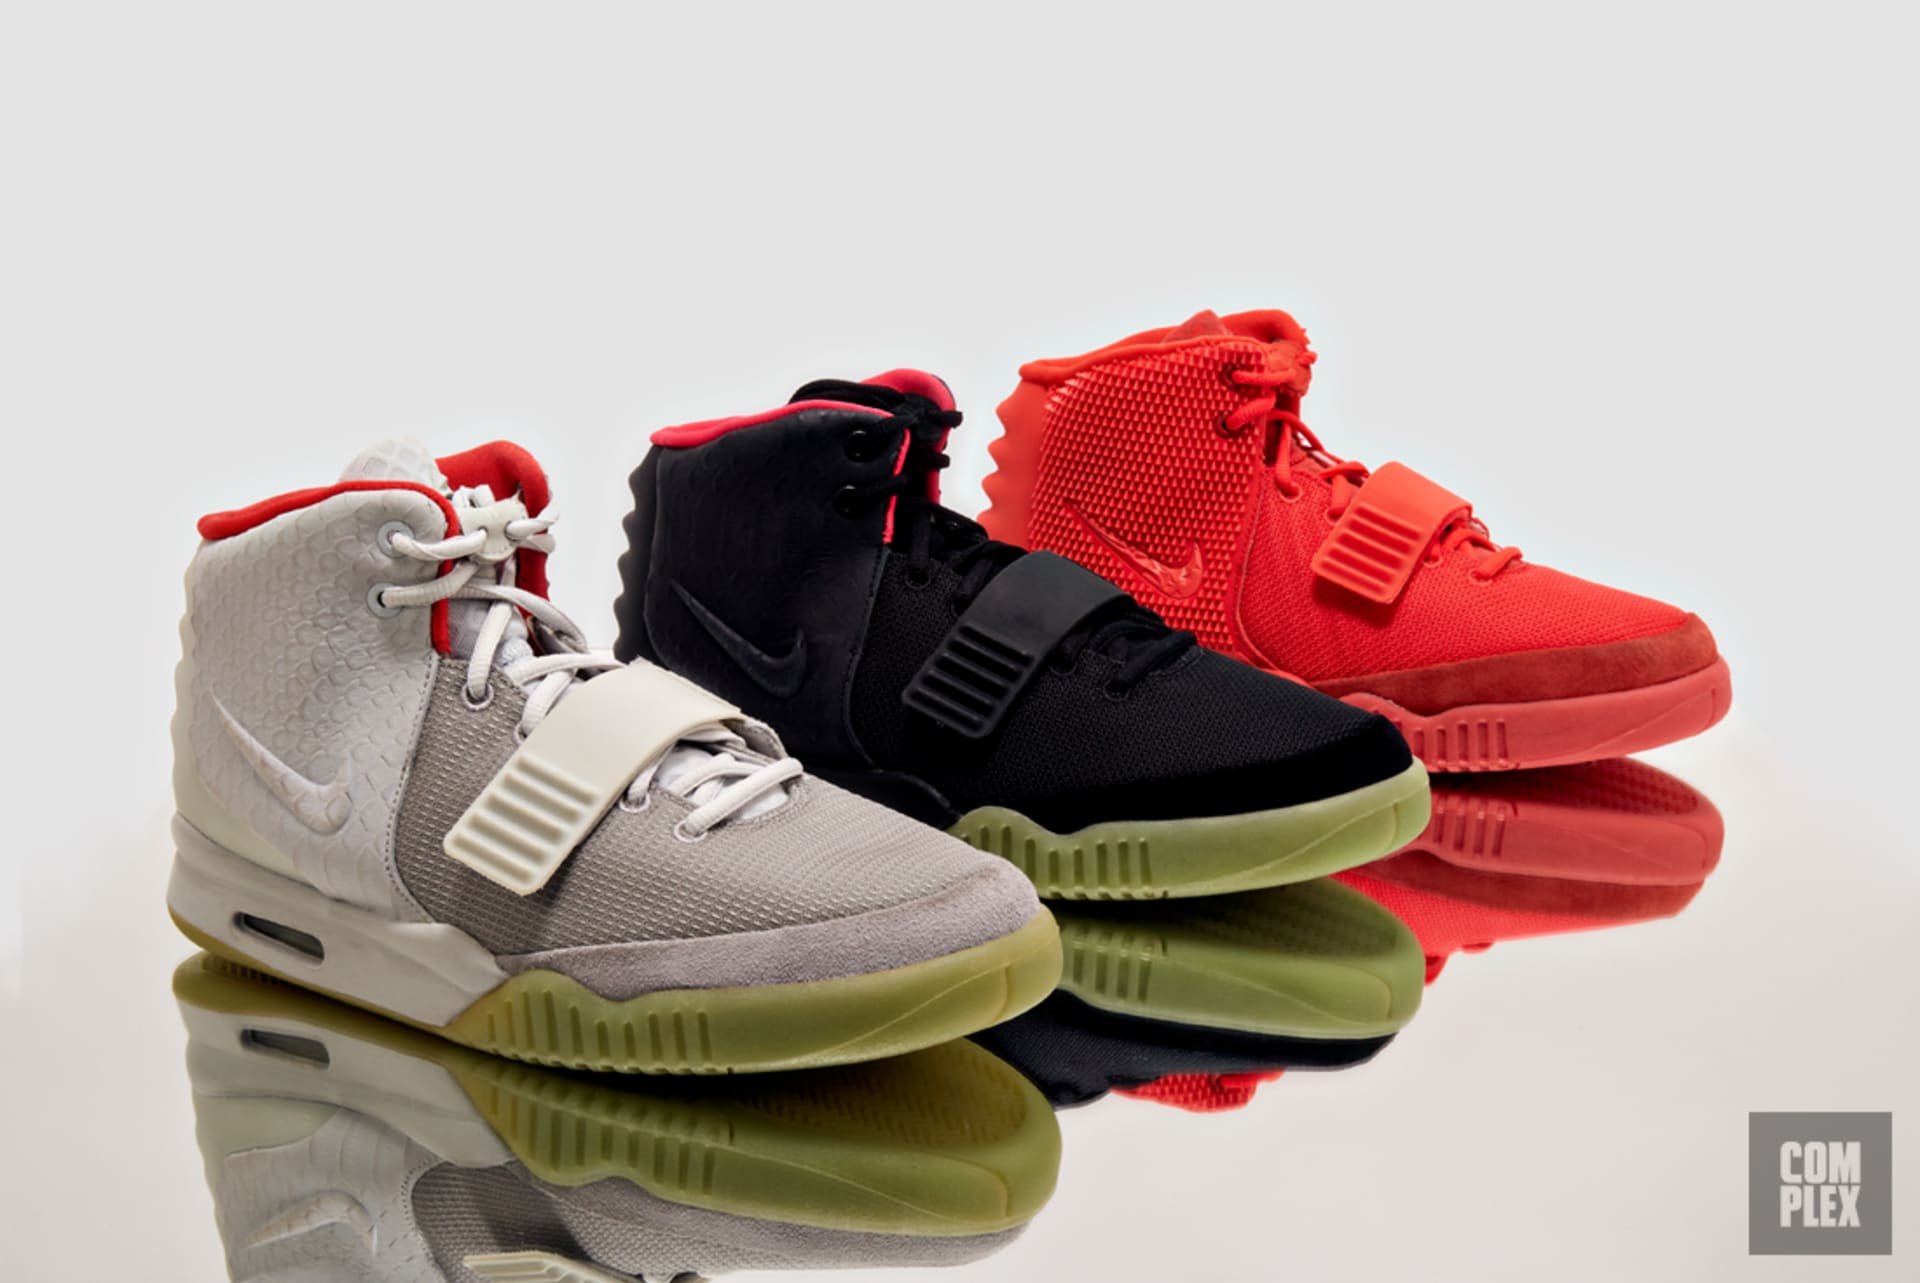 Capilla Distribución Significado How the Air Yeezy 2 Led to Kanye West's Greatest Success — and Nike's  Biggest Failure | Complex